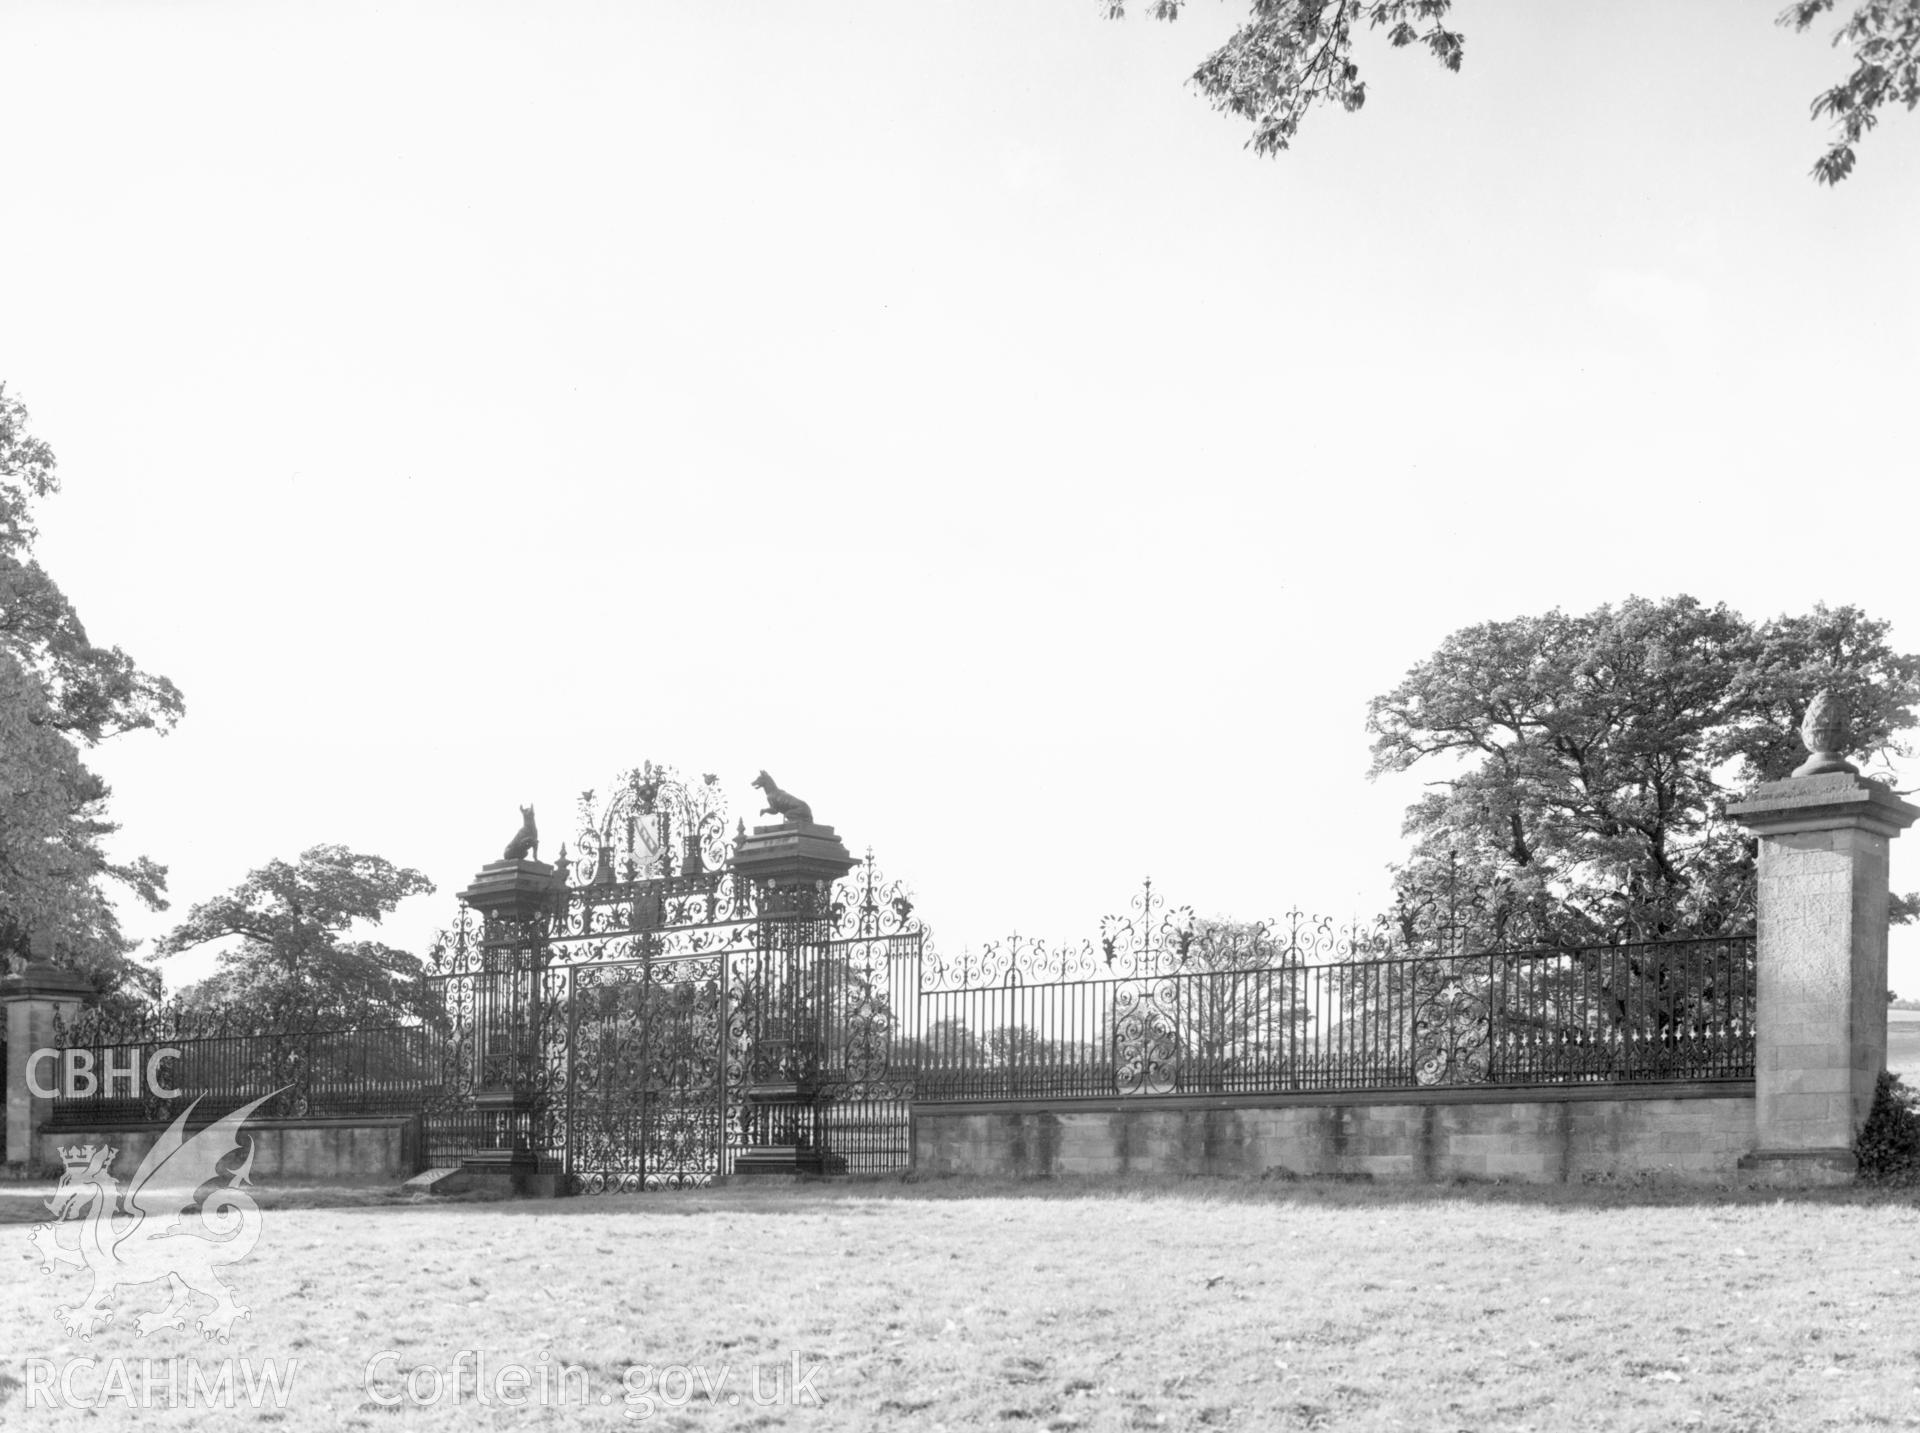 1 b/w print showing view of Chirk castle entrance gates, collated by the former Central Office of Information.